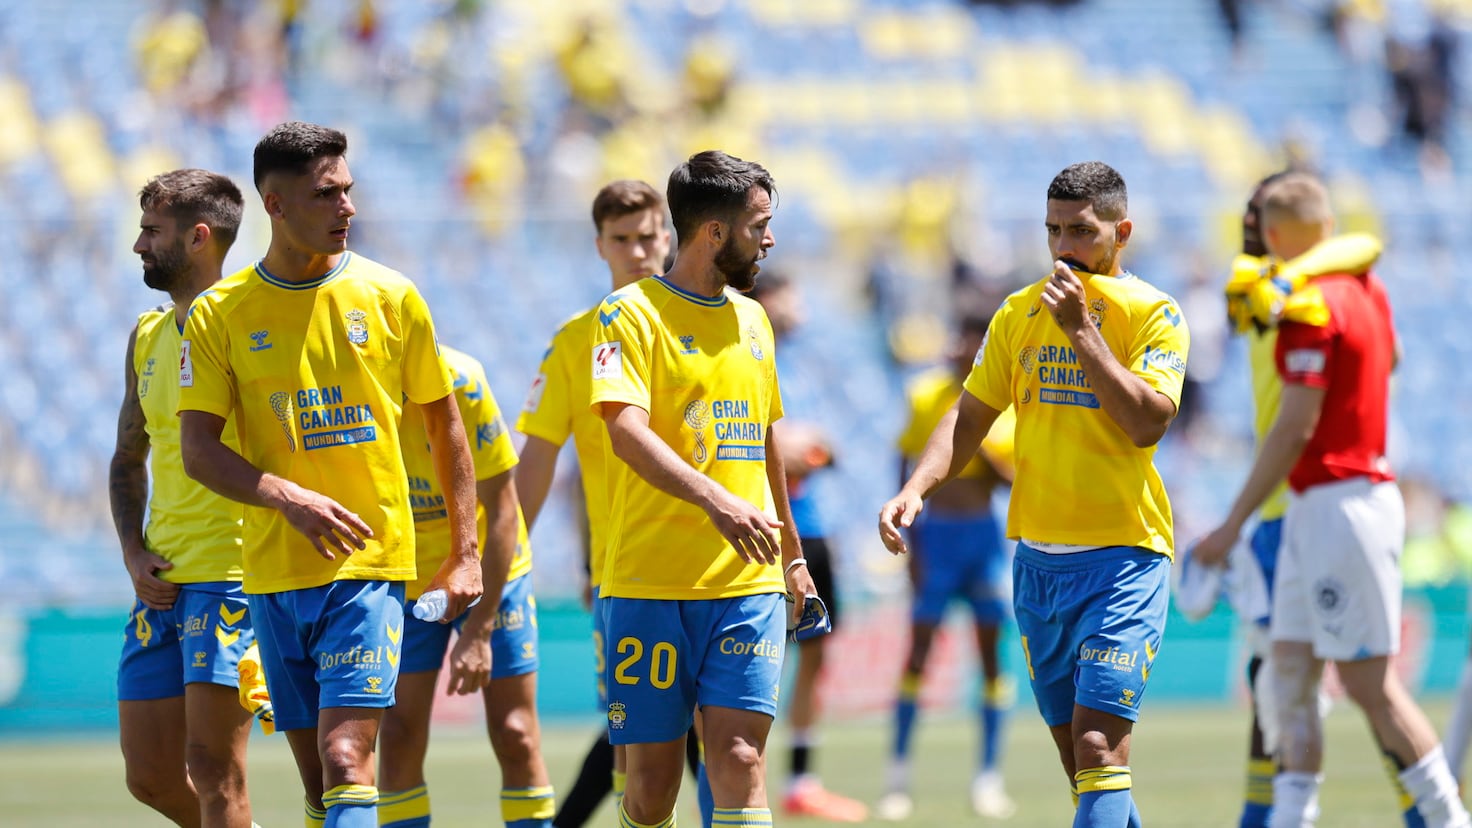 UD Las Palmas Grapples with Repetitive Midday Matches: Cardona Calls for Equitable Scheduling